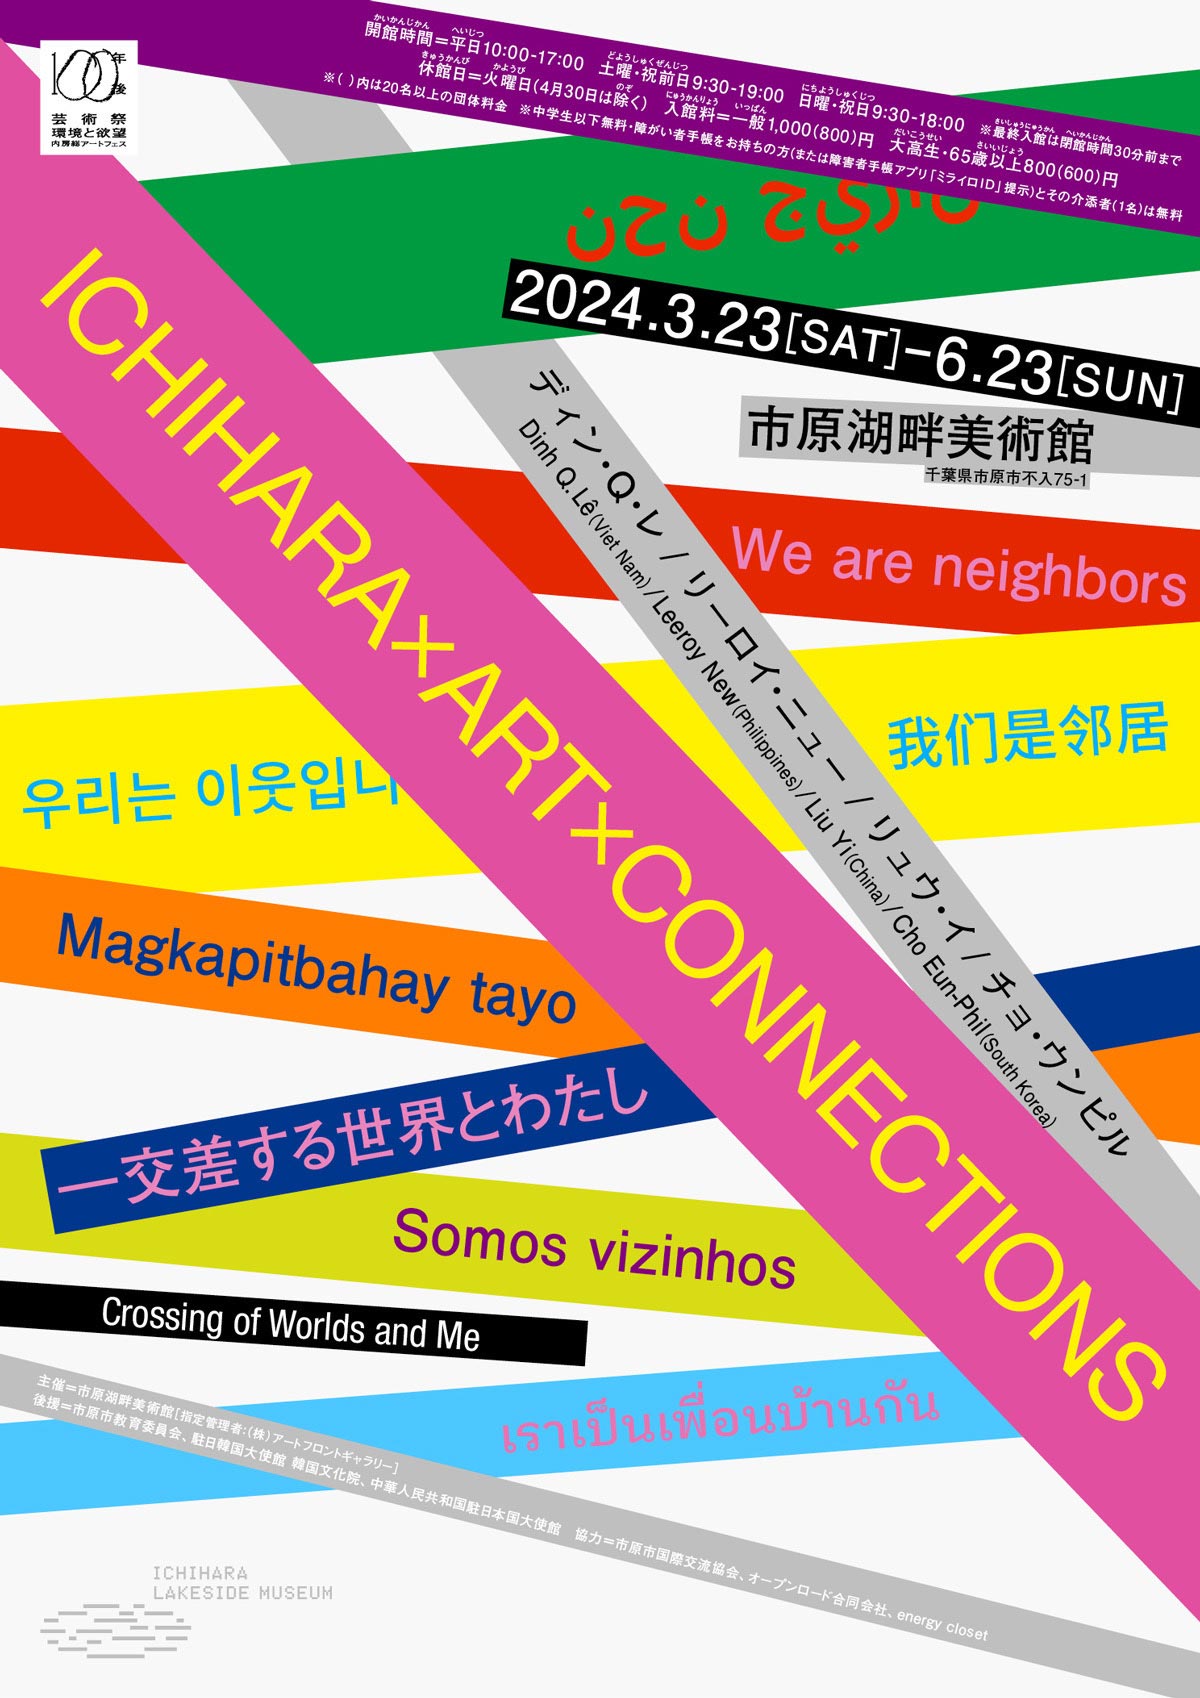 ICHIHARA×ART×CONNECTIONS Crossing of Words and Me